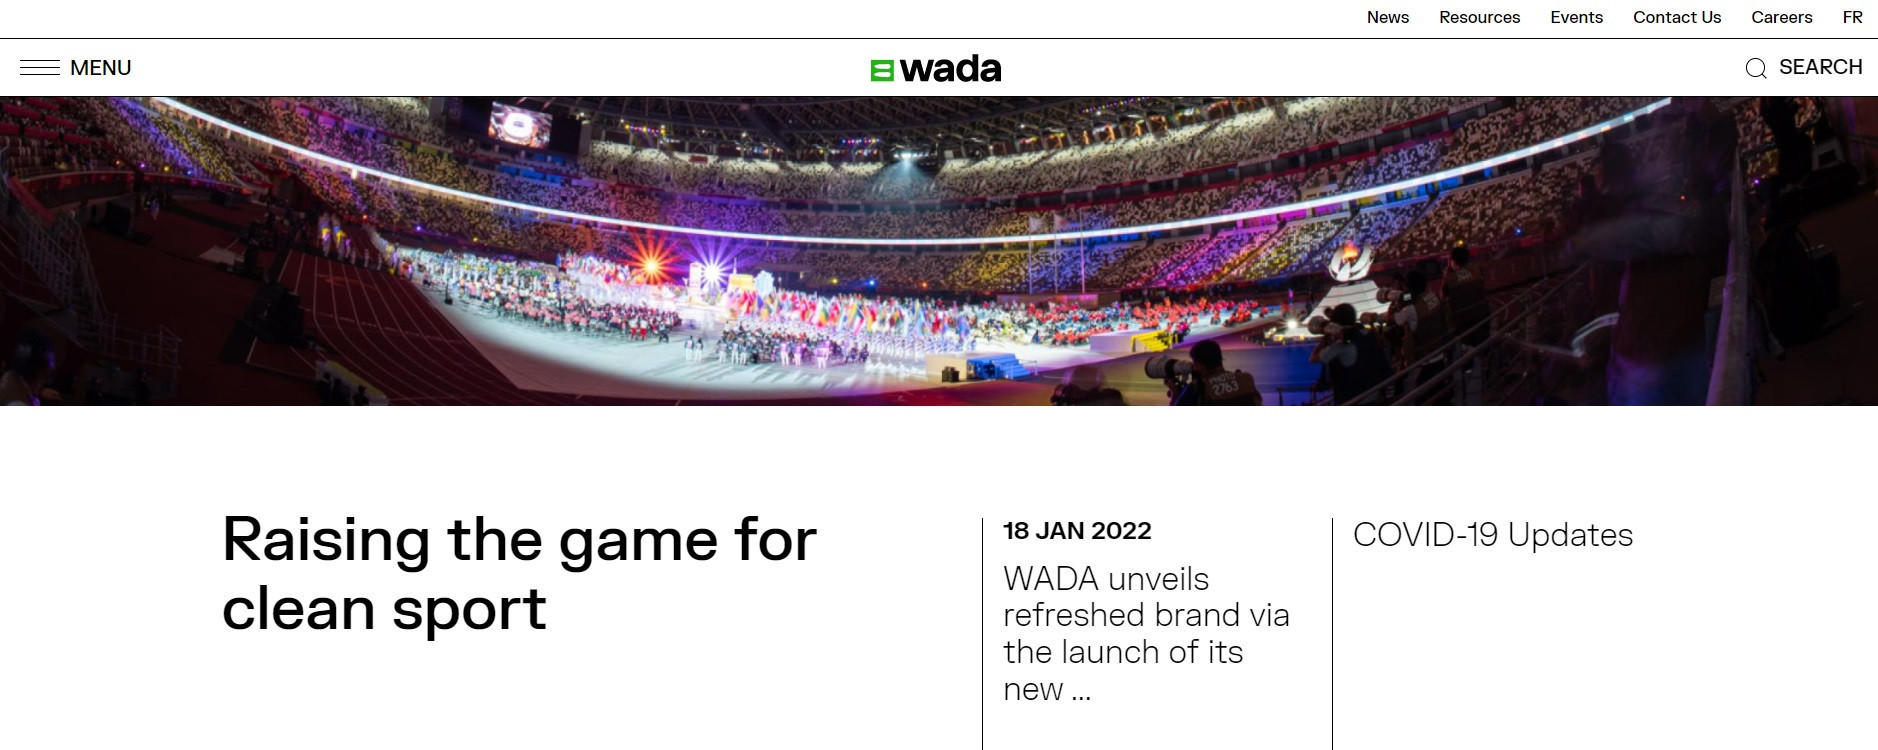 WADA has also launched a new website as part of its brand refresh ©WADA